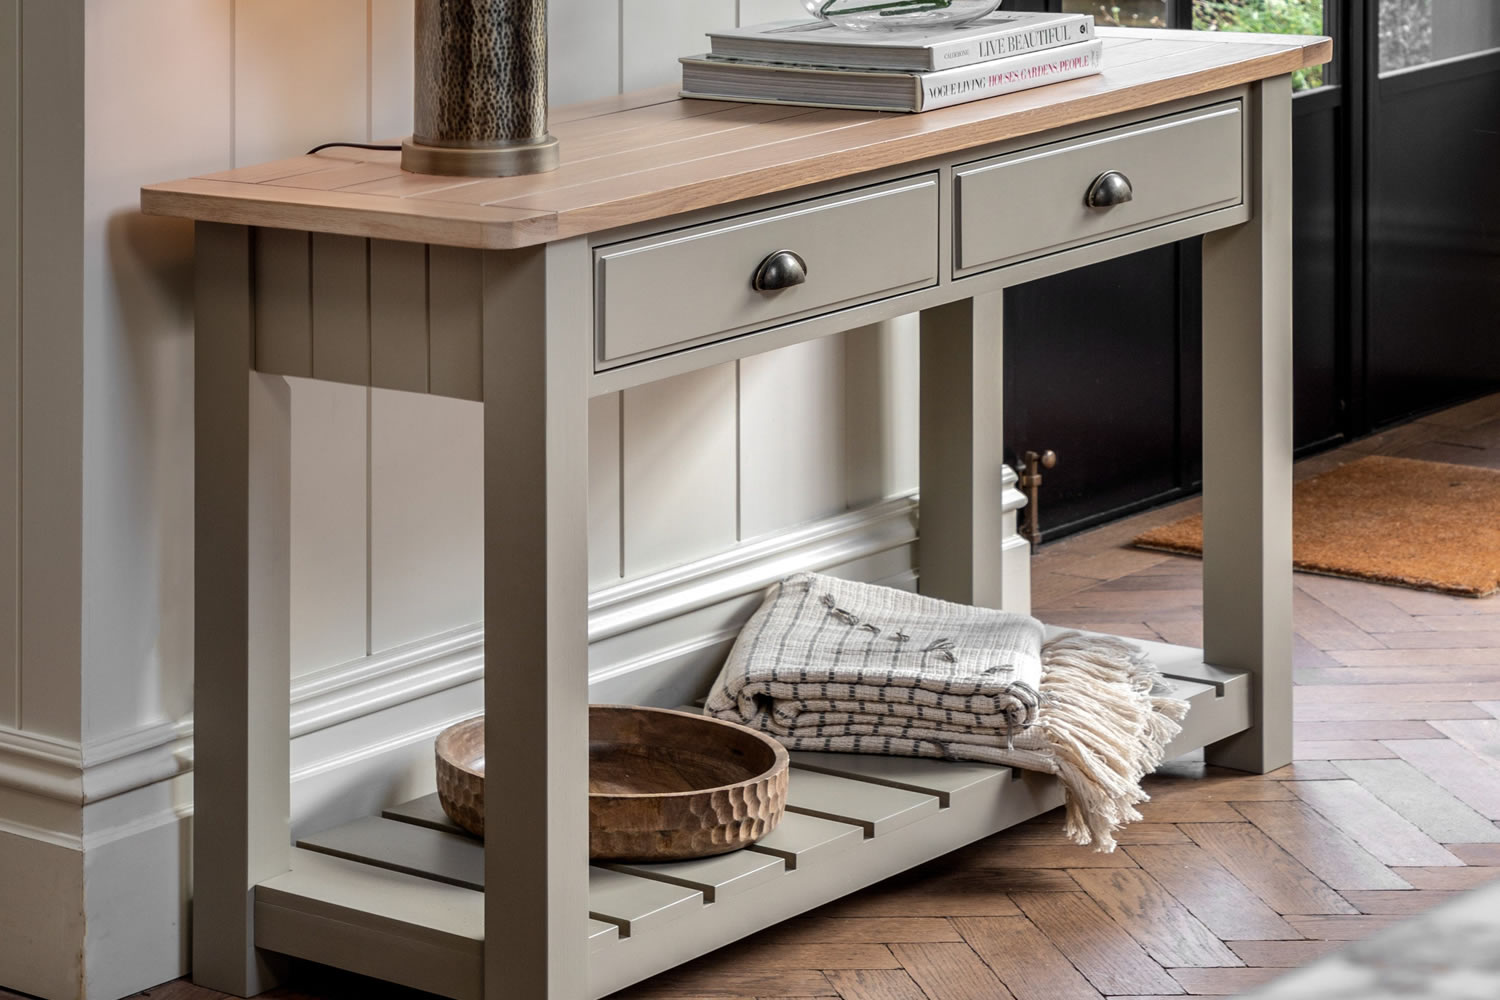 View Eton Prairie 2Drawer Console Crafted From Oak Pine MDF 2 Spacious Drawers Lower Slatted Storage Shelf Sleek Metal Handles Easy Assembly information